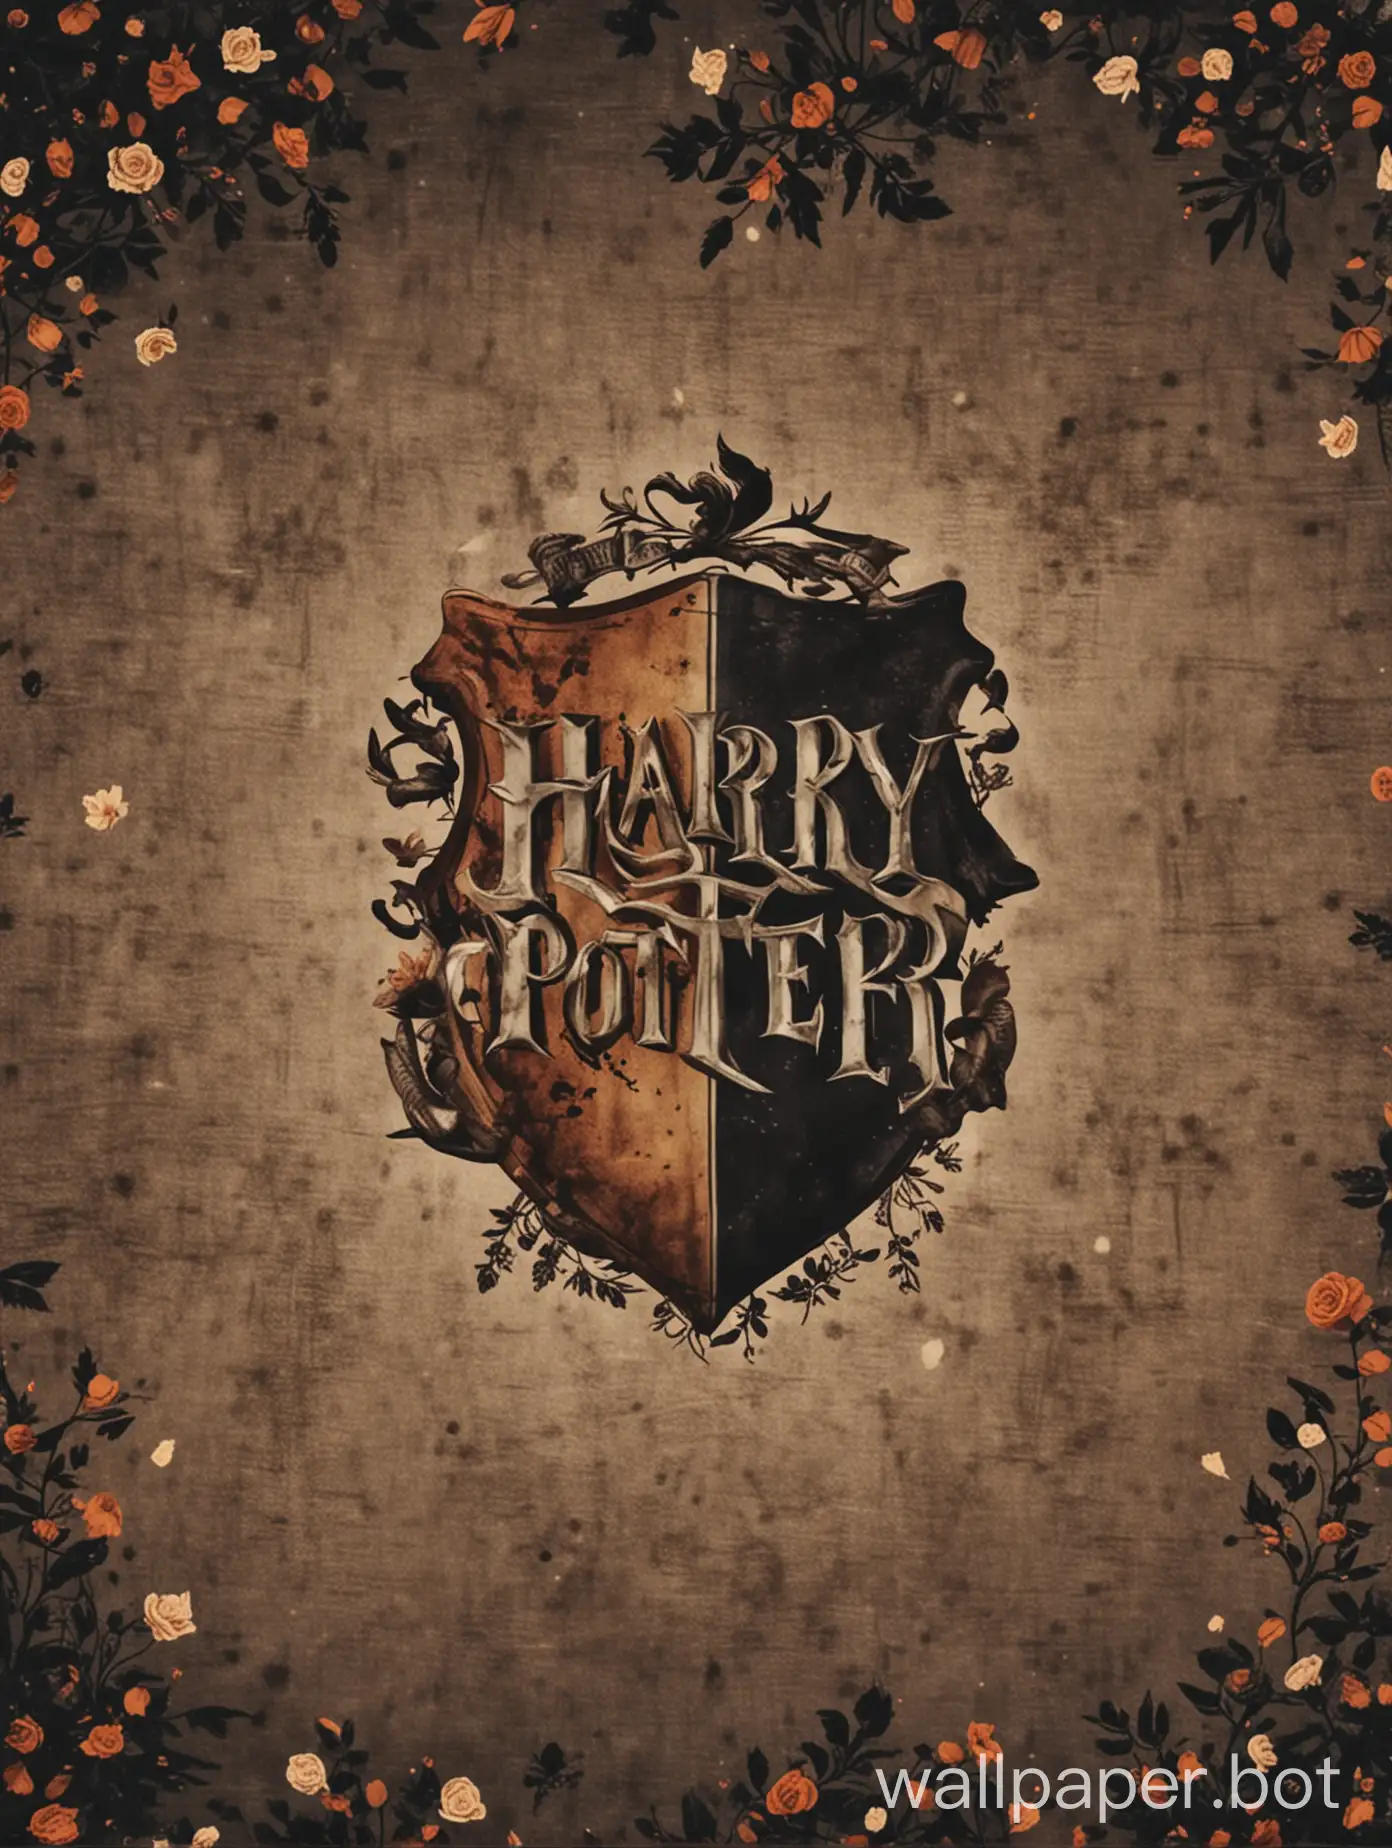 Aesthetic-Wallpaper-with-Harry-Potter-Theme